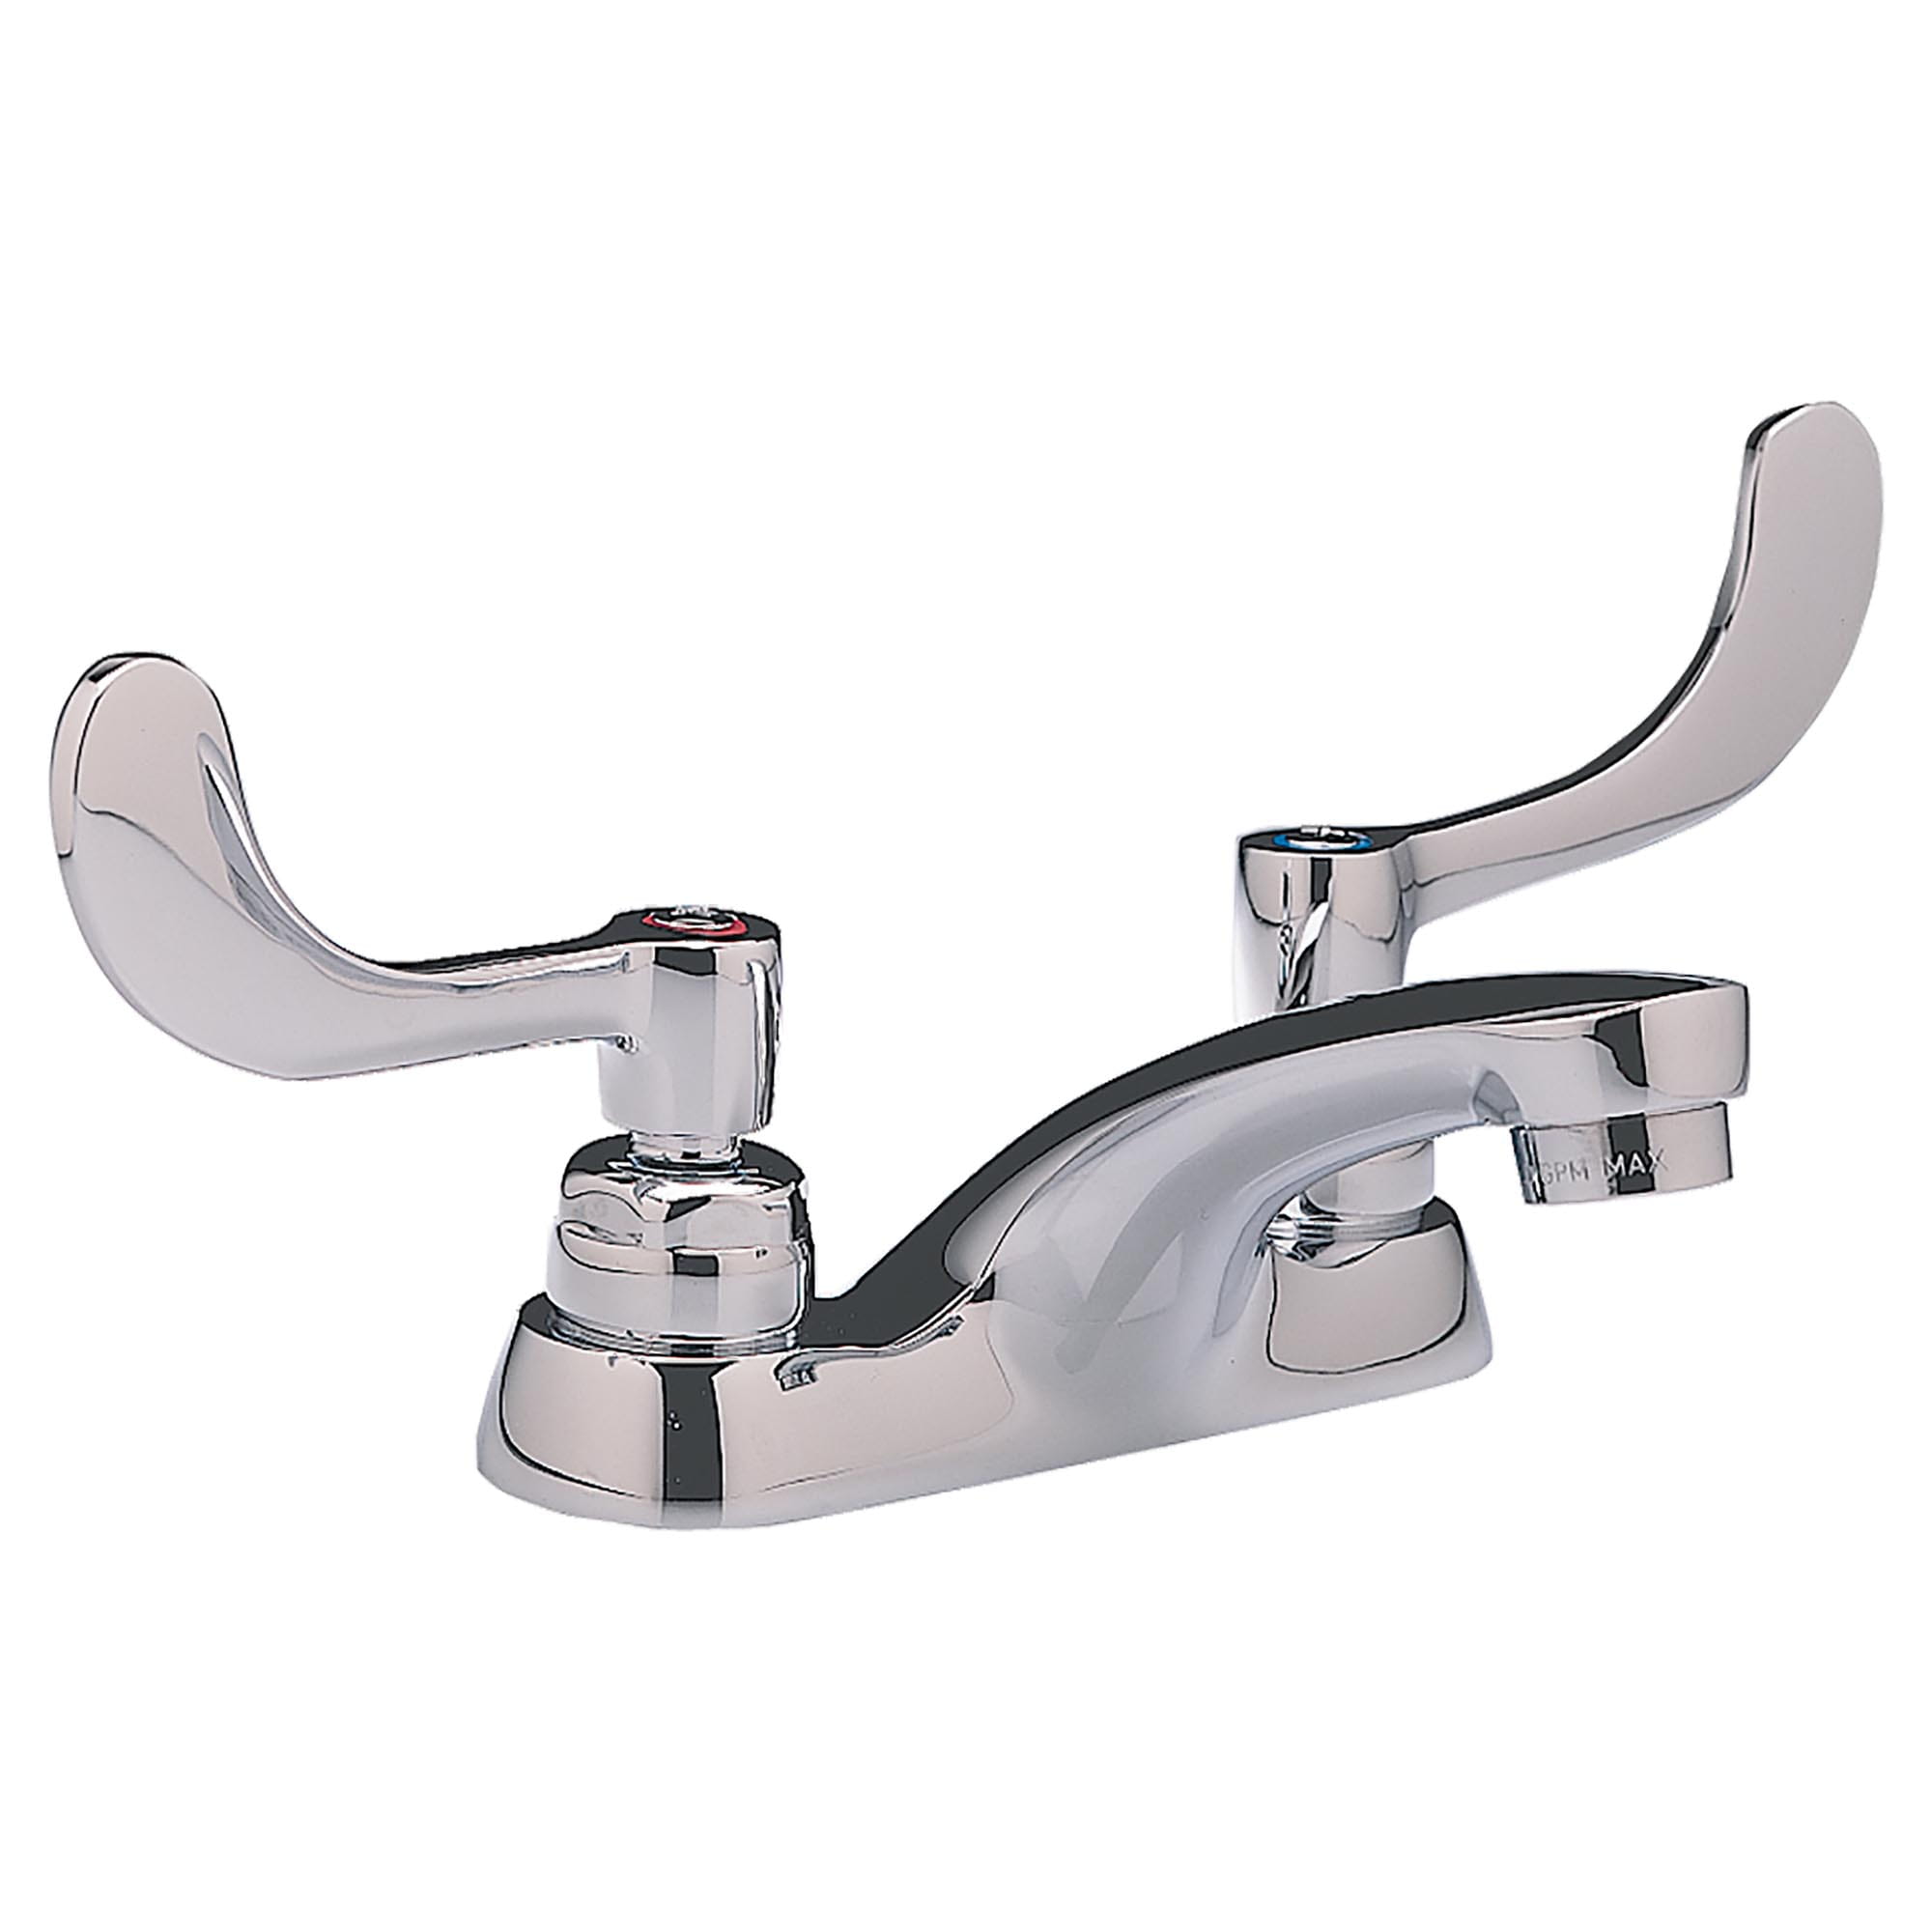 Monterrey® 4-Inch Centerset Cast Faucet With Wrist Blade Handles 0.5 gpm/1.9 Lpm With Grid Drain